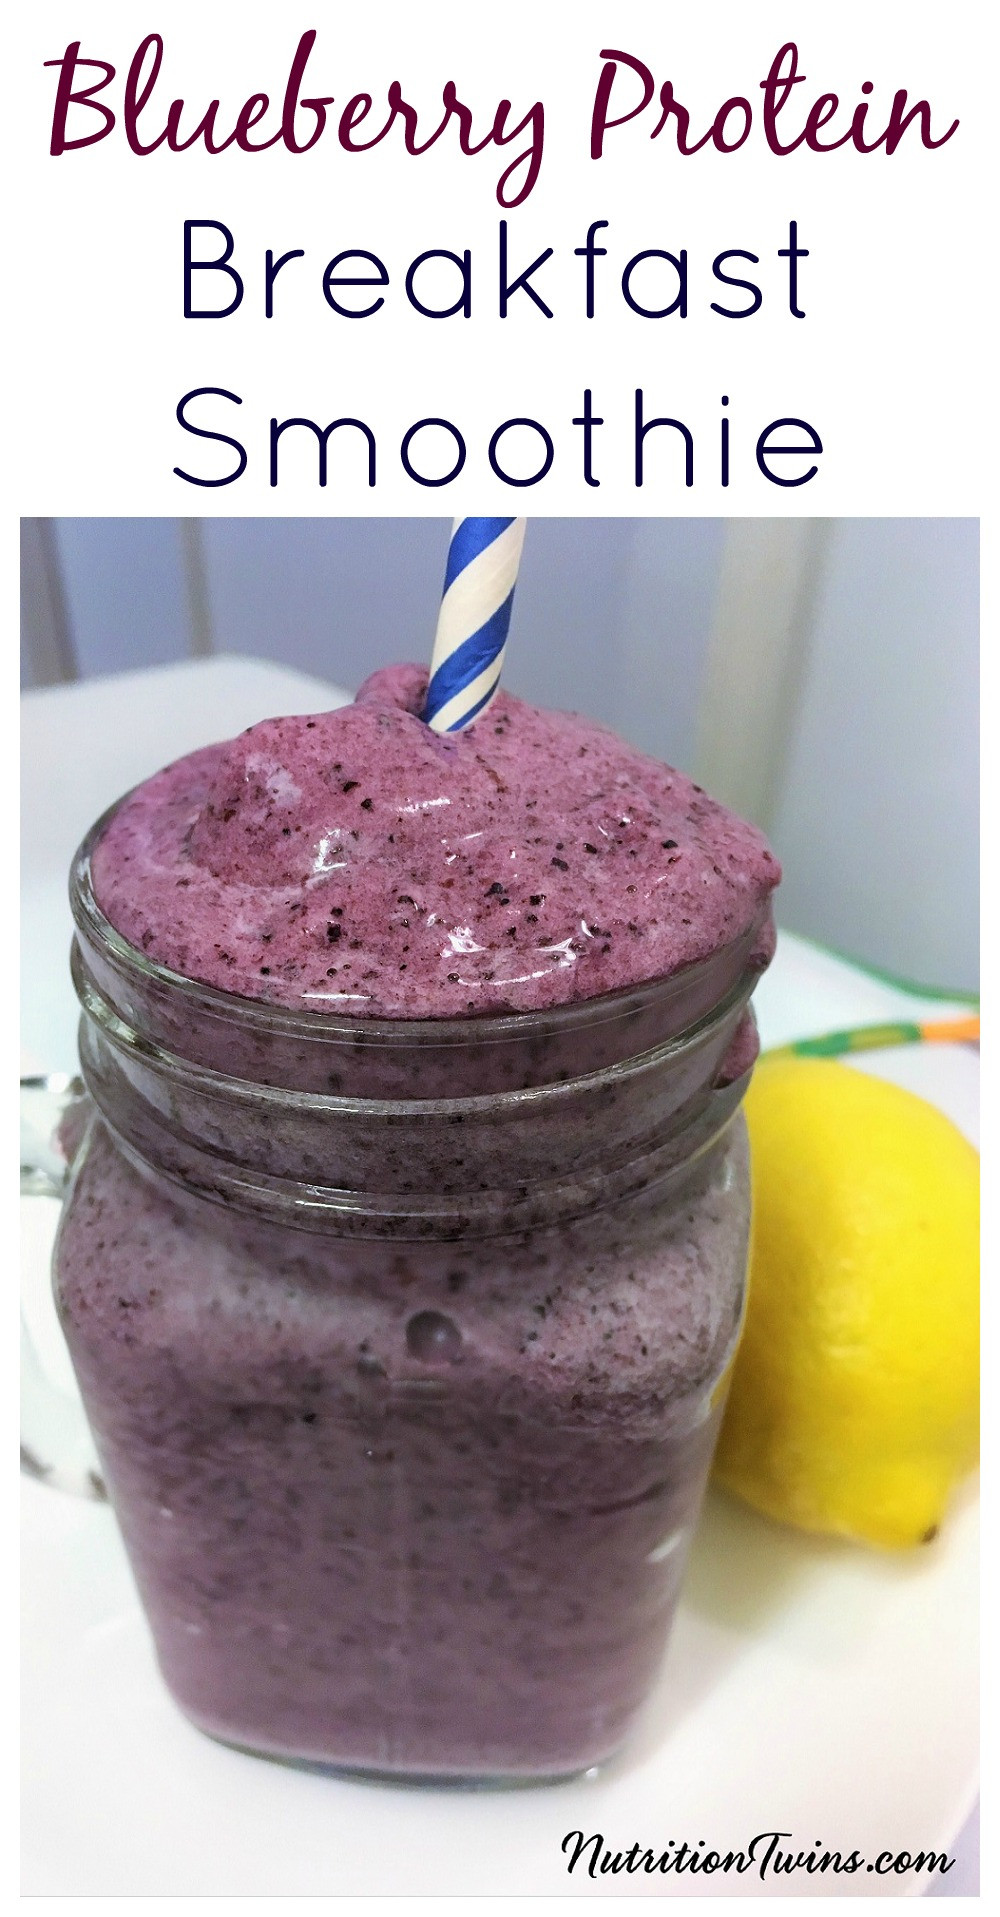 High Fiber Smoothie Recipes Weight Loss
 Blueberry Protein Weight Loss Breakfast Smoothie